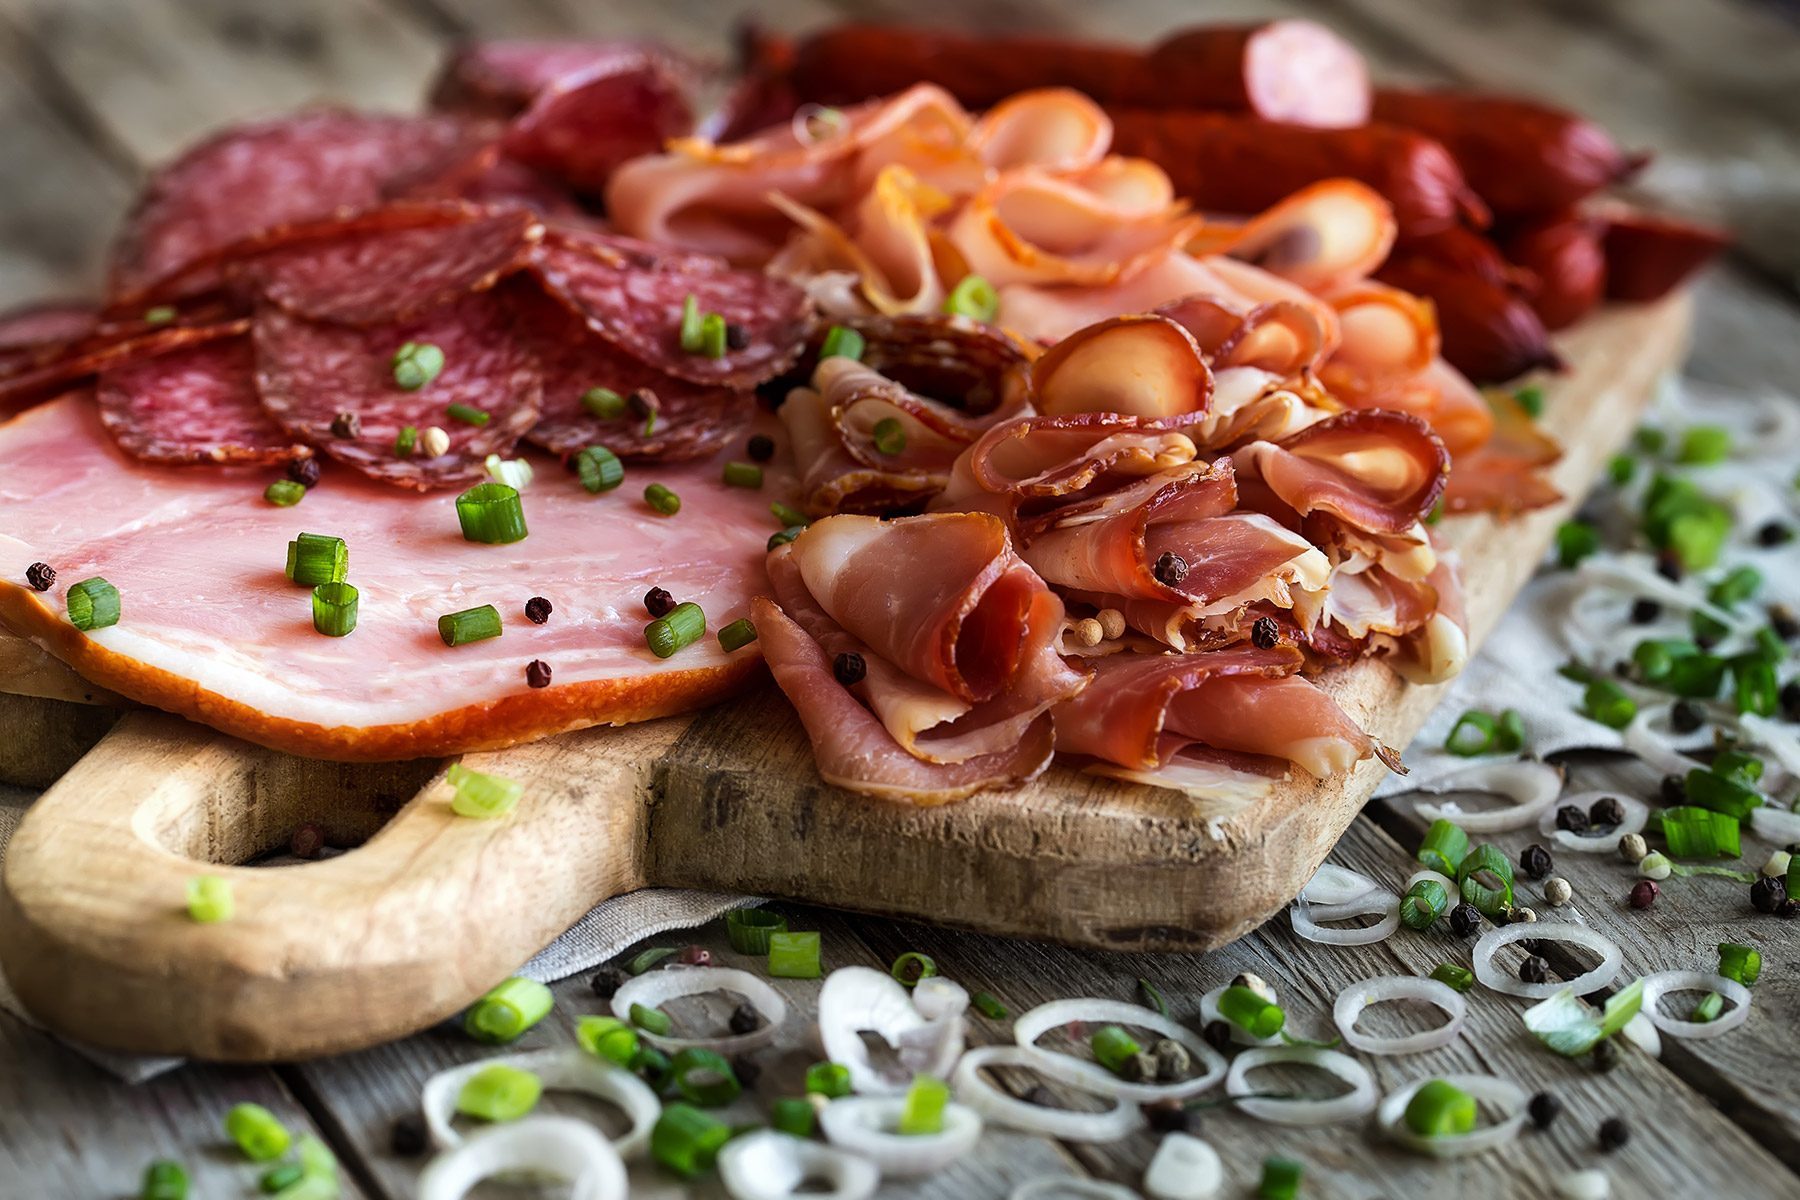 The 5 Best Healthy Meats To Eat Processed Meats Gettyimages 1124545171